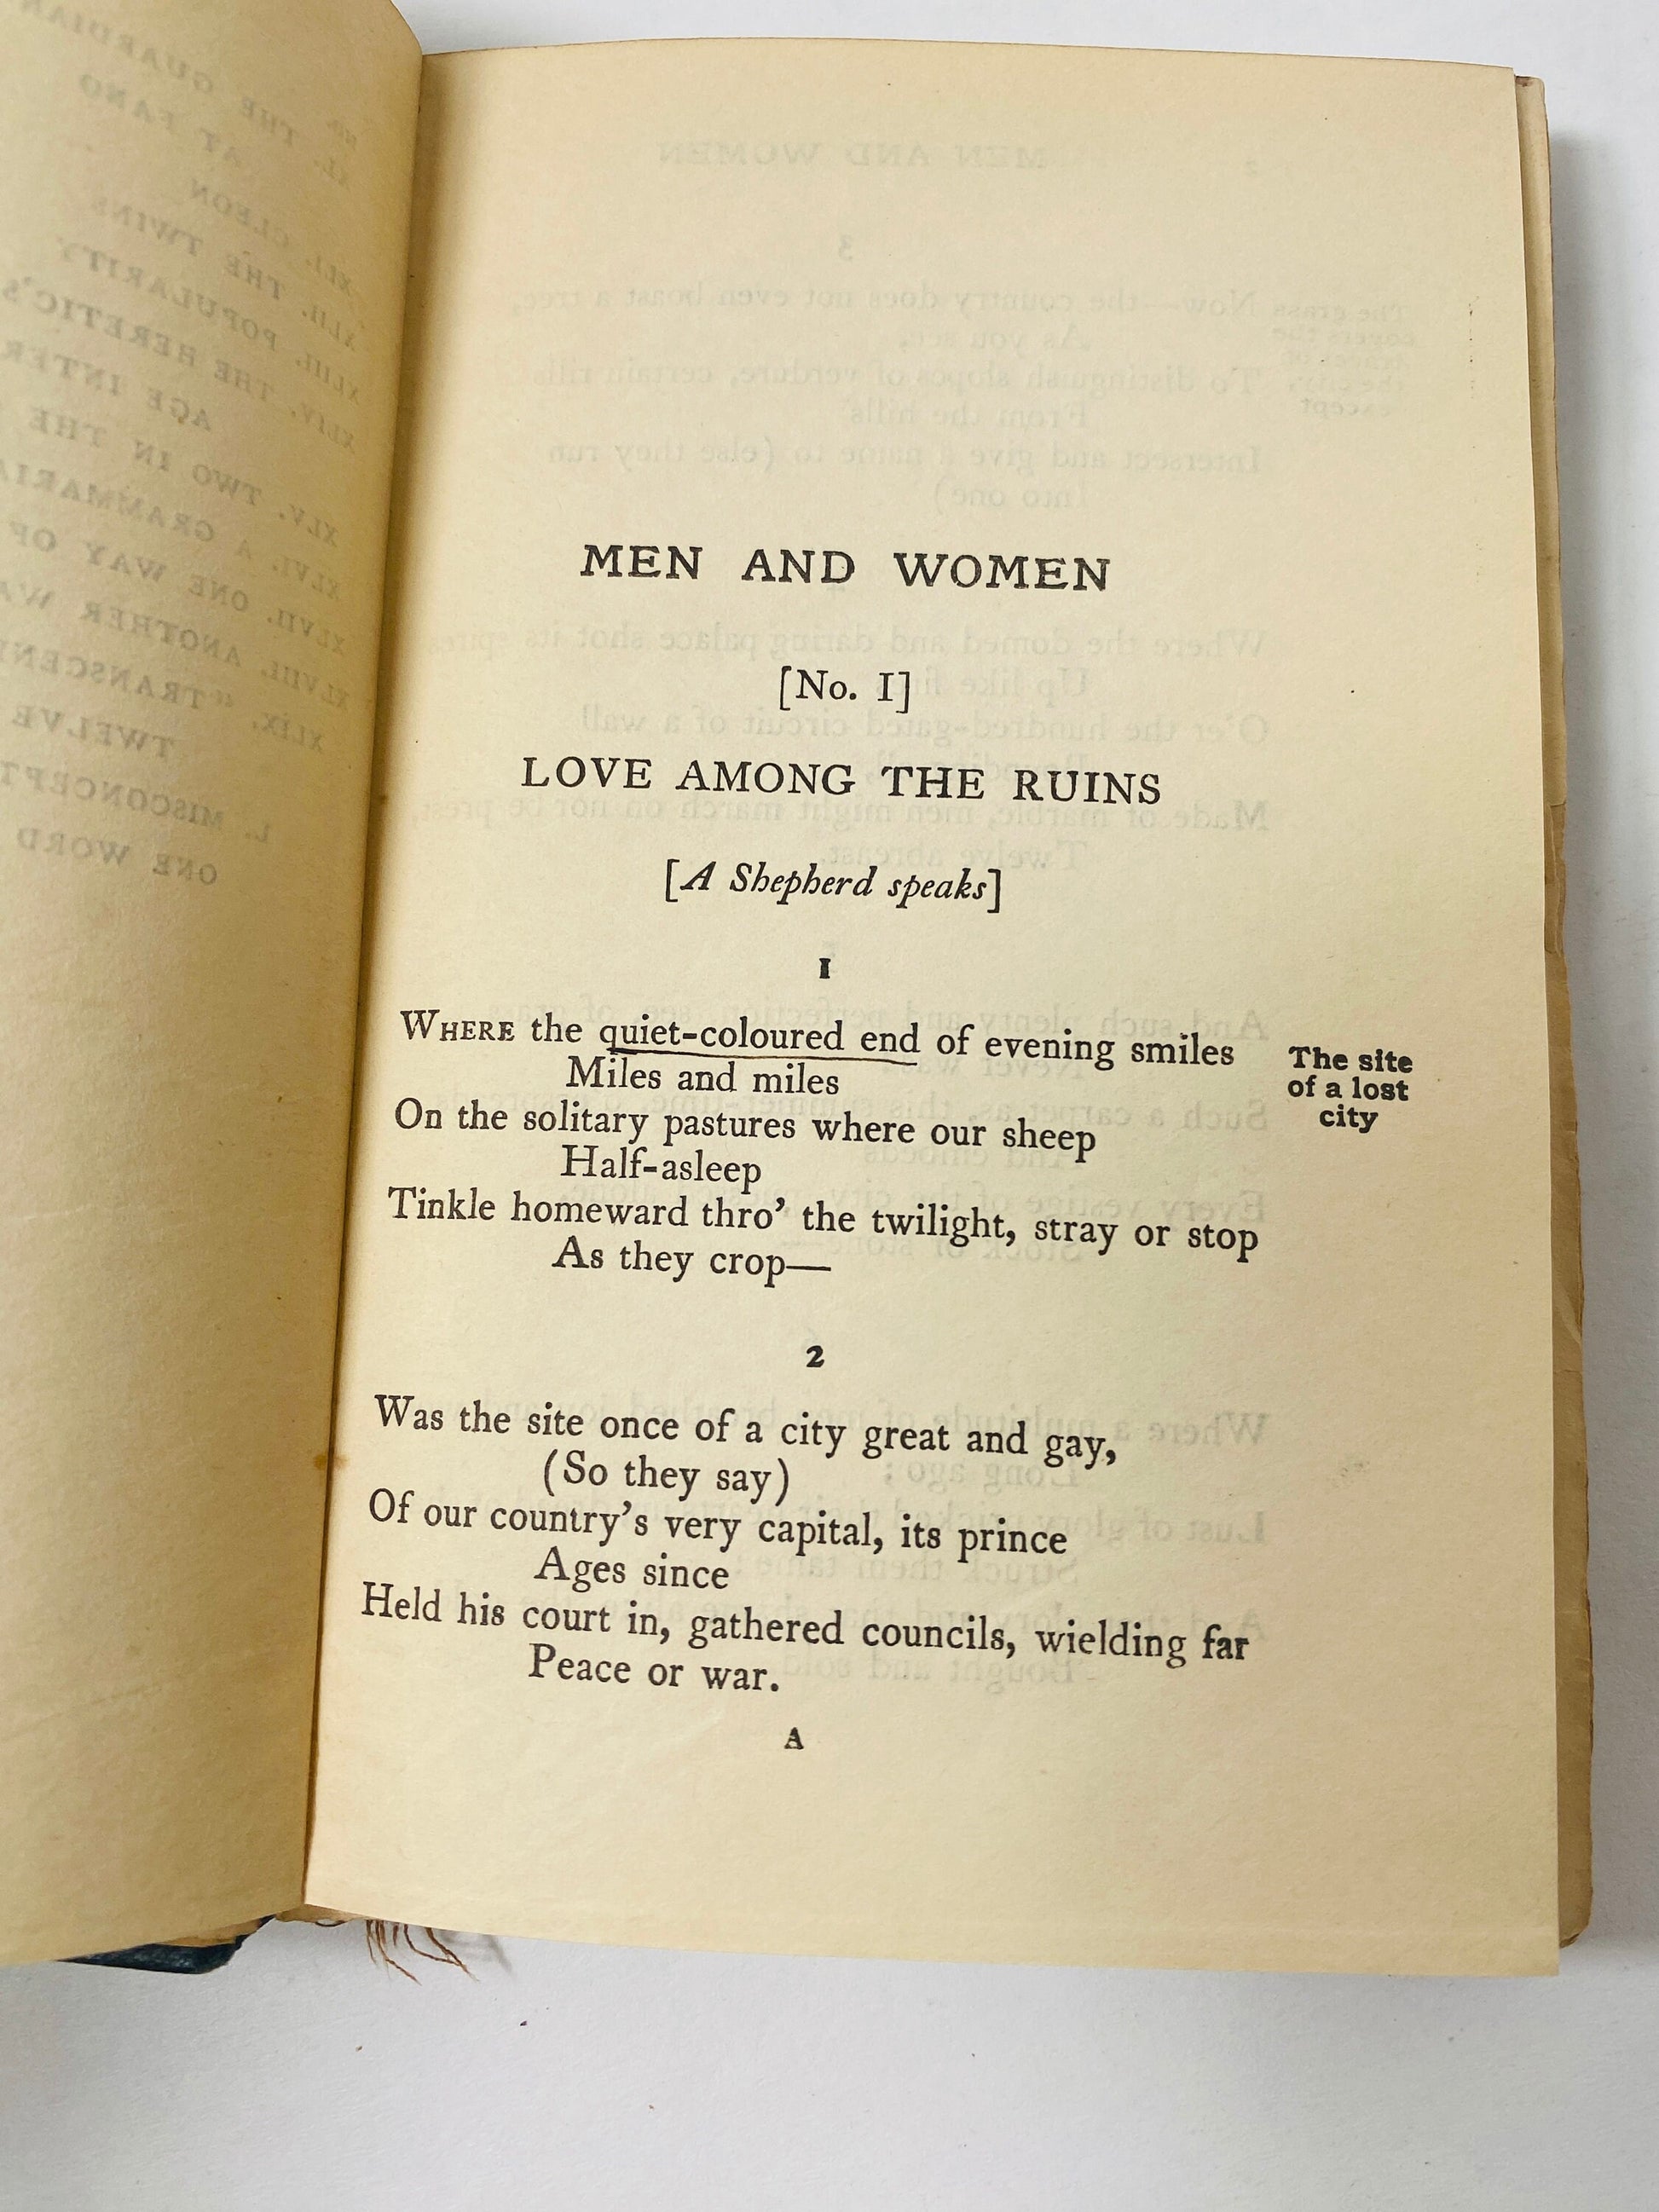 Men & Women antique poetry by Robert Browning book GORGEOUS vintage book circa 1905 Dedicated to Alfred Tennyson. Poetry gift.